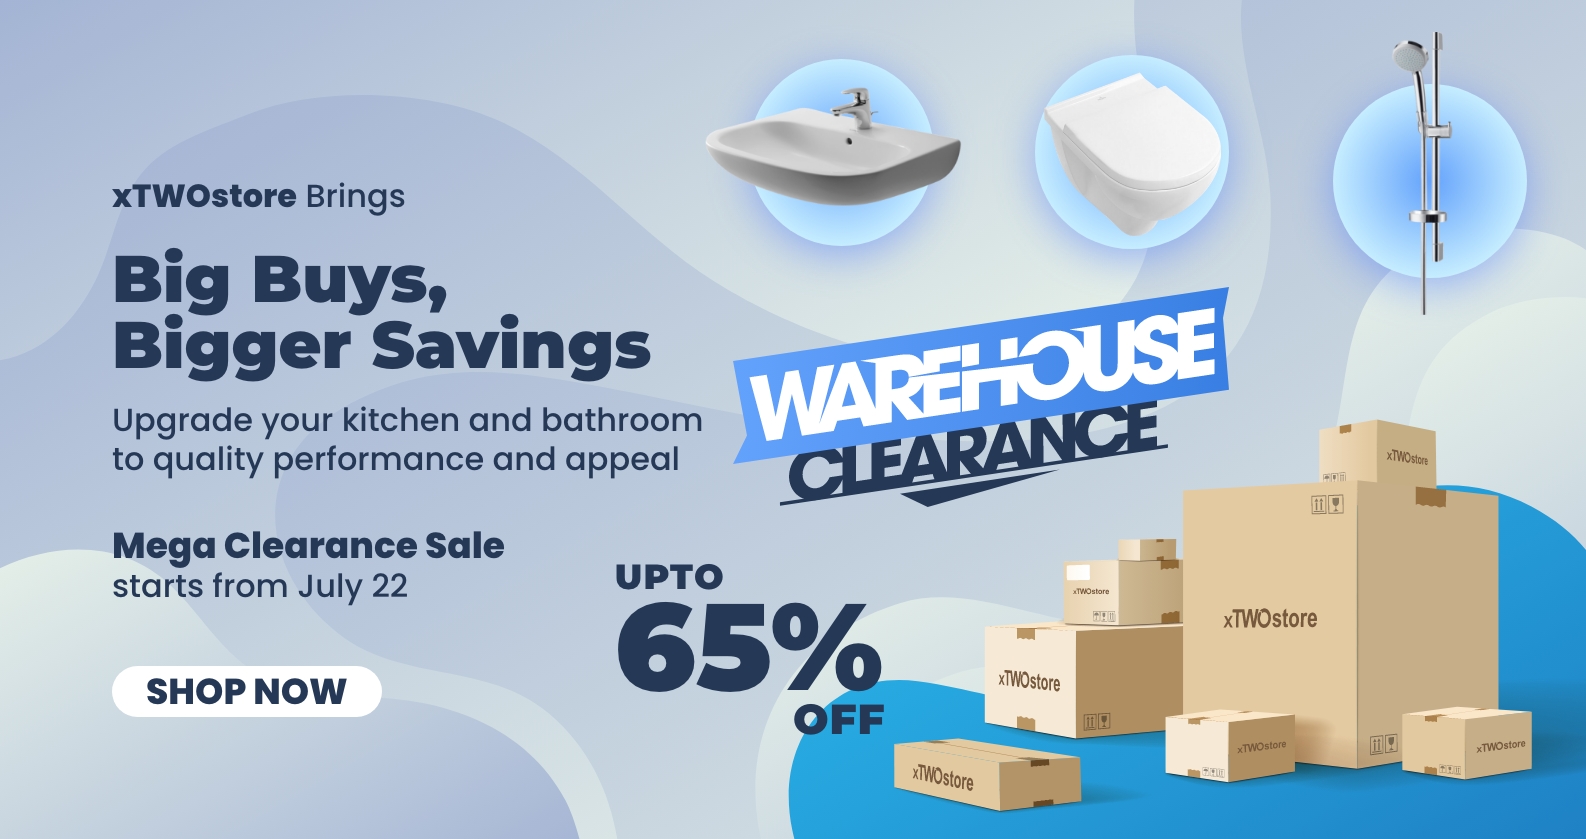 Warehouse Clearance Sale at xTWOstore